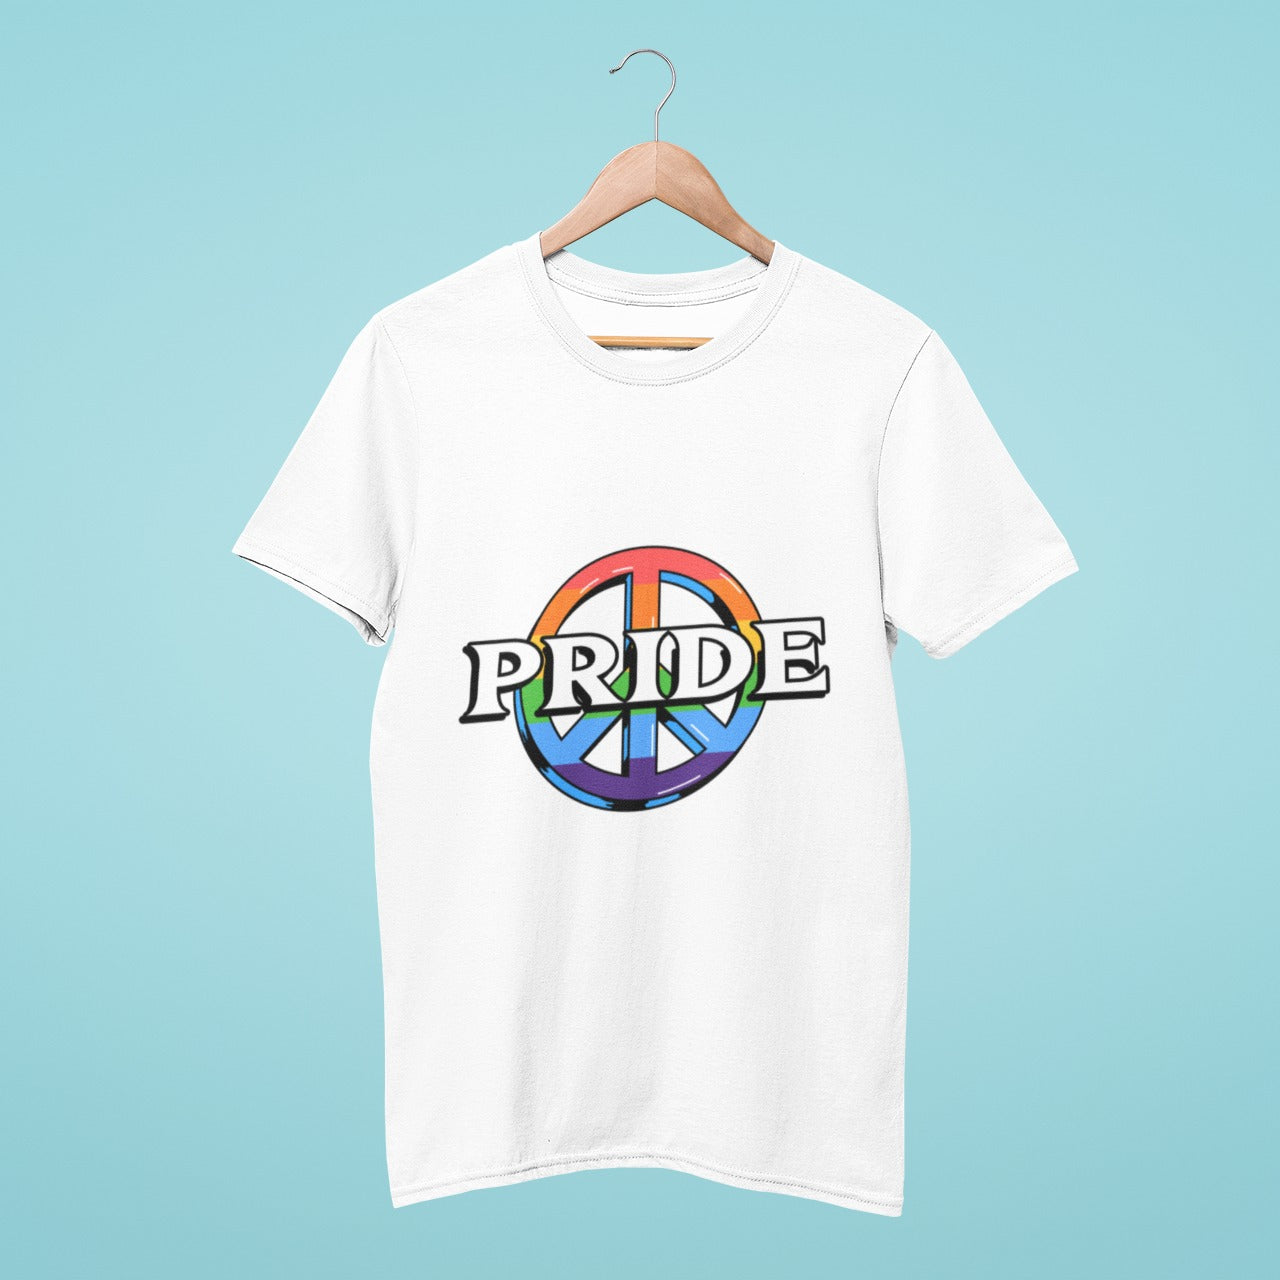 Spread the message of unity and love with our white t-shirt featuring "Pride" in bold letters and a peace symbol in rainbow colours in the background. This tee is made from high-quality materials, perfect for LGBTQ+ events and Pride celebrations. Order now and show your support for the community with this empowering and stylish t-shirt that spreads a powerful message of love and acceptance.